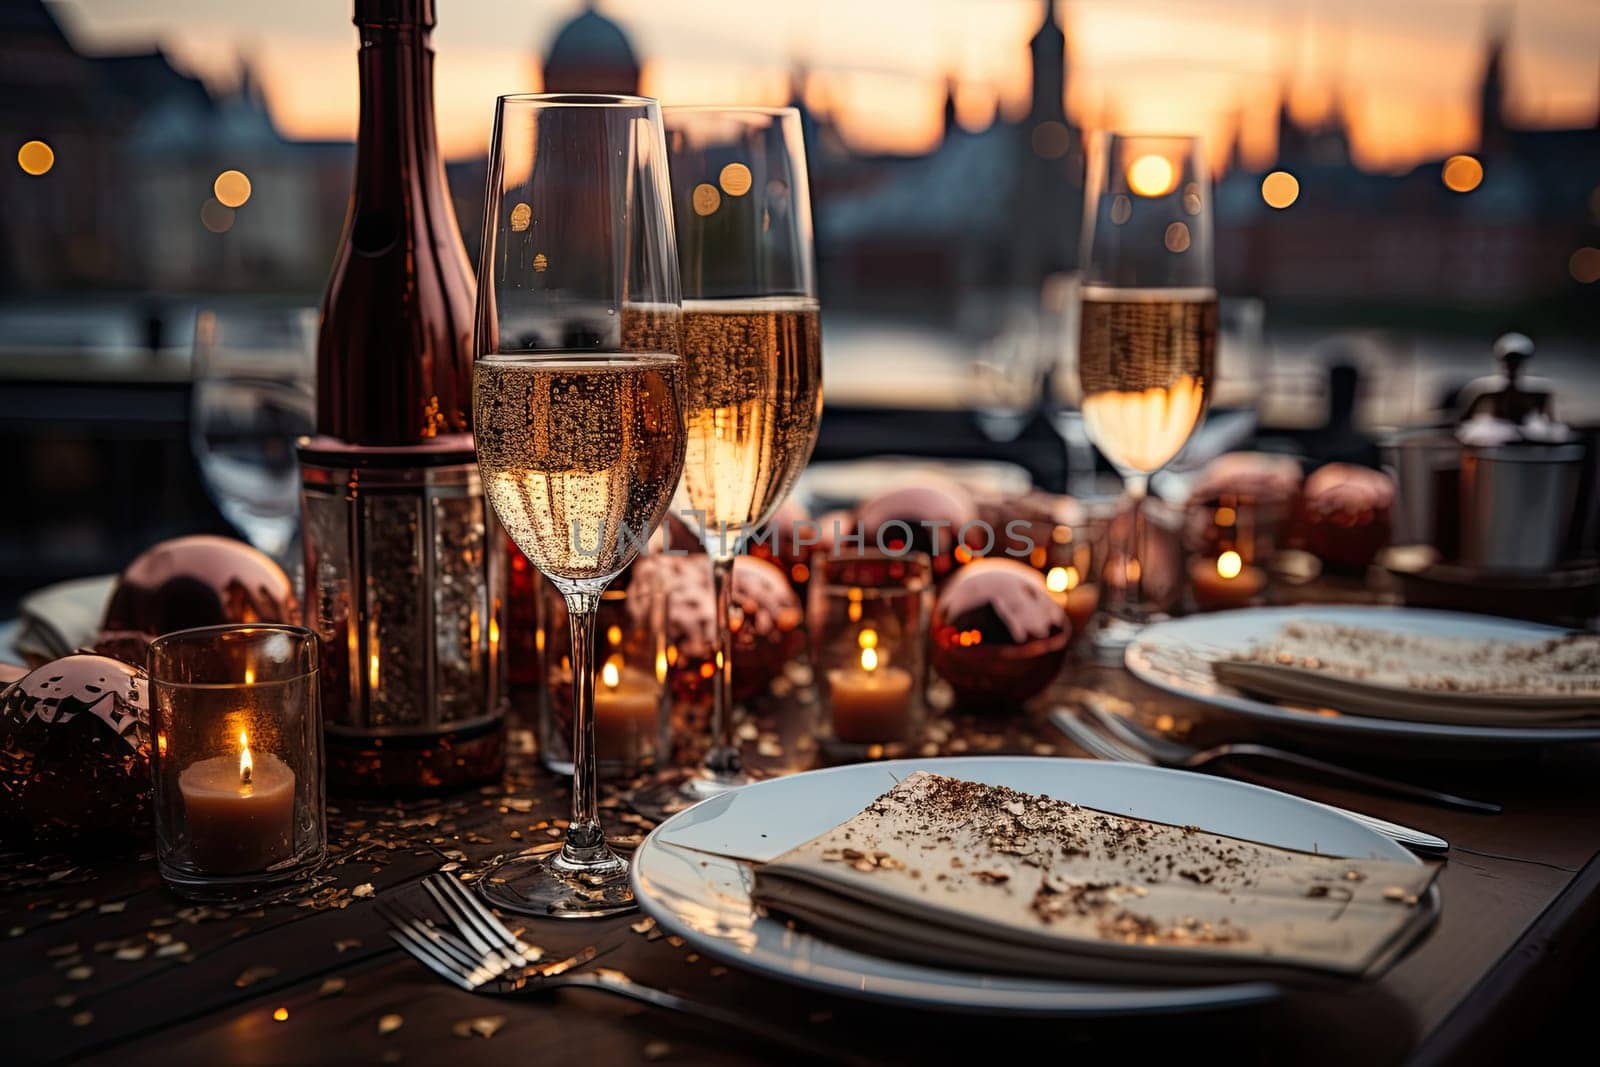 a table setting with wine glasses, plates and uts on it in front of a view of the city